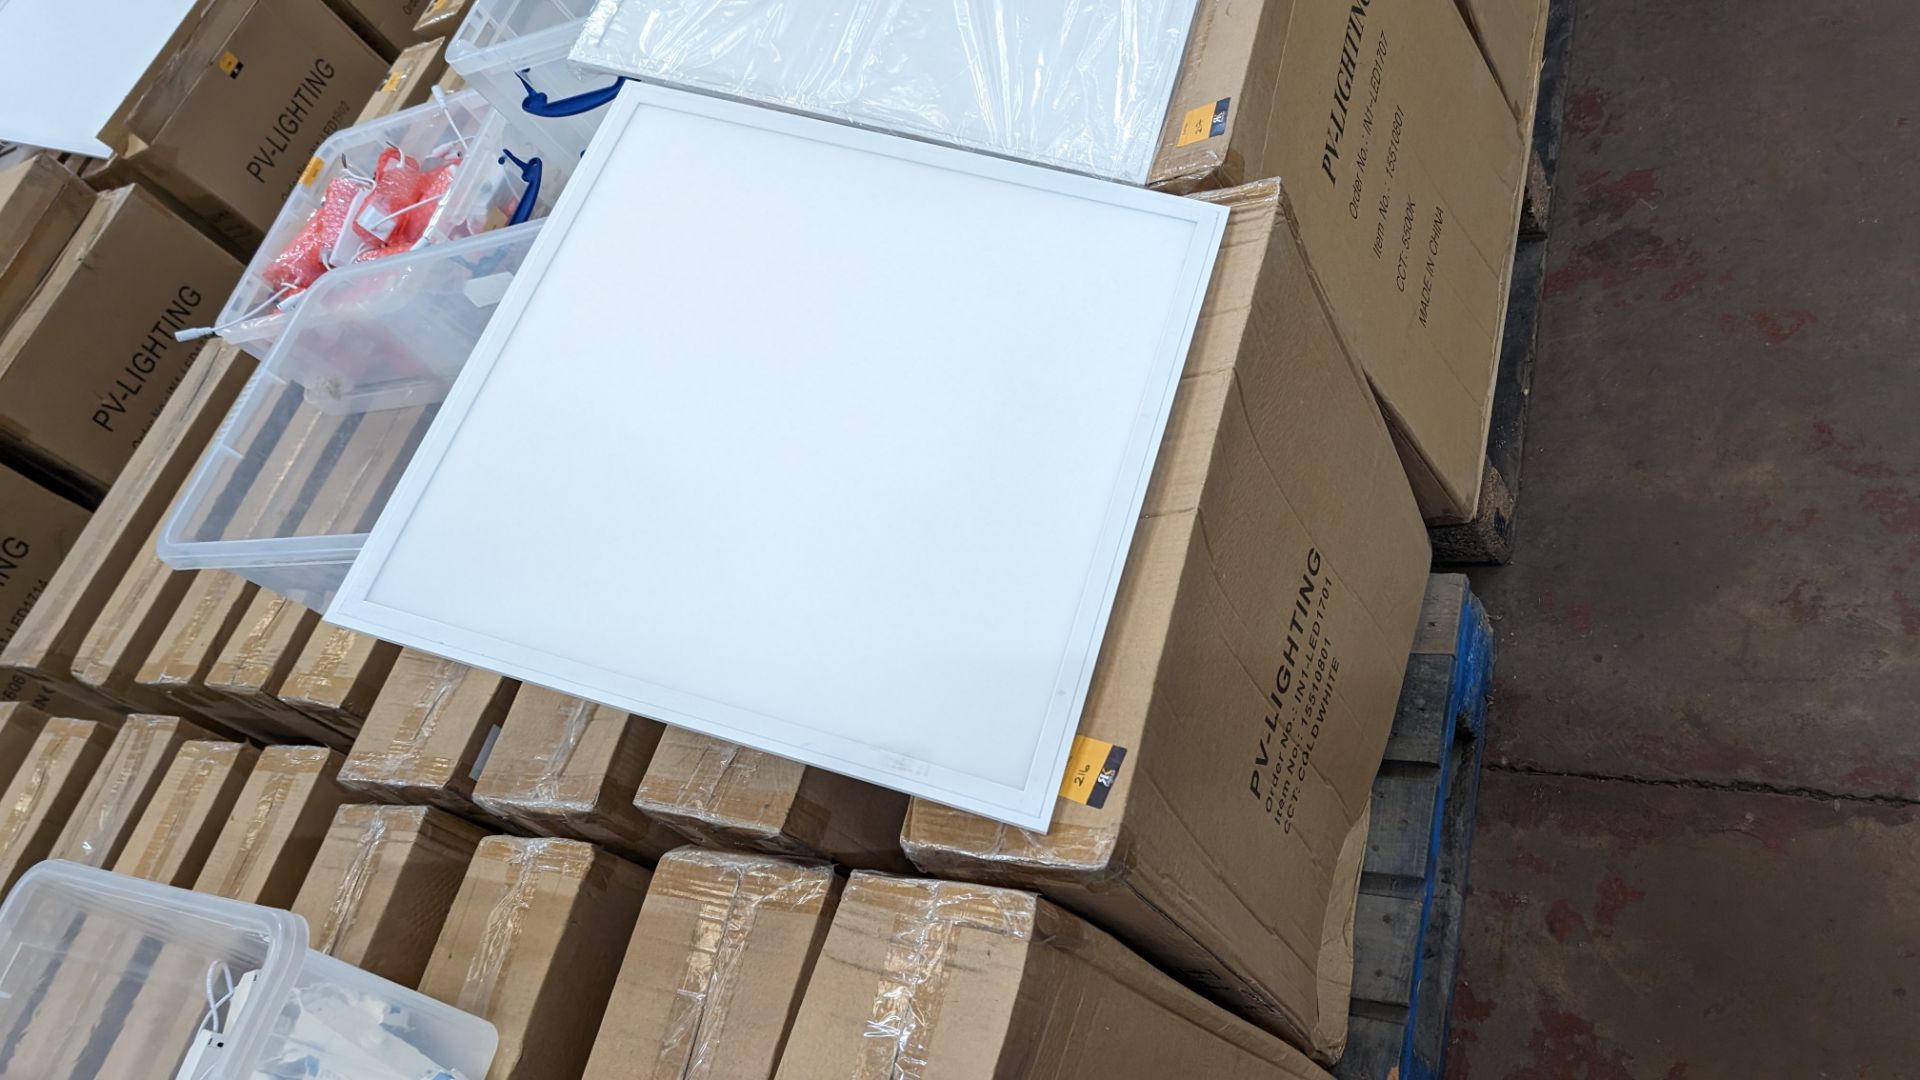 16 off 600mm x 600mm 36w 6000k 4320 lumens cold white LED lighting panels. 36w drivers. This lot c - Image 4 of 12